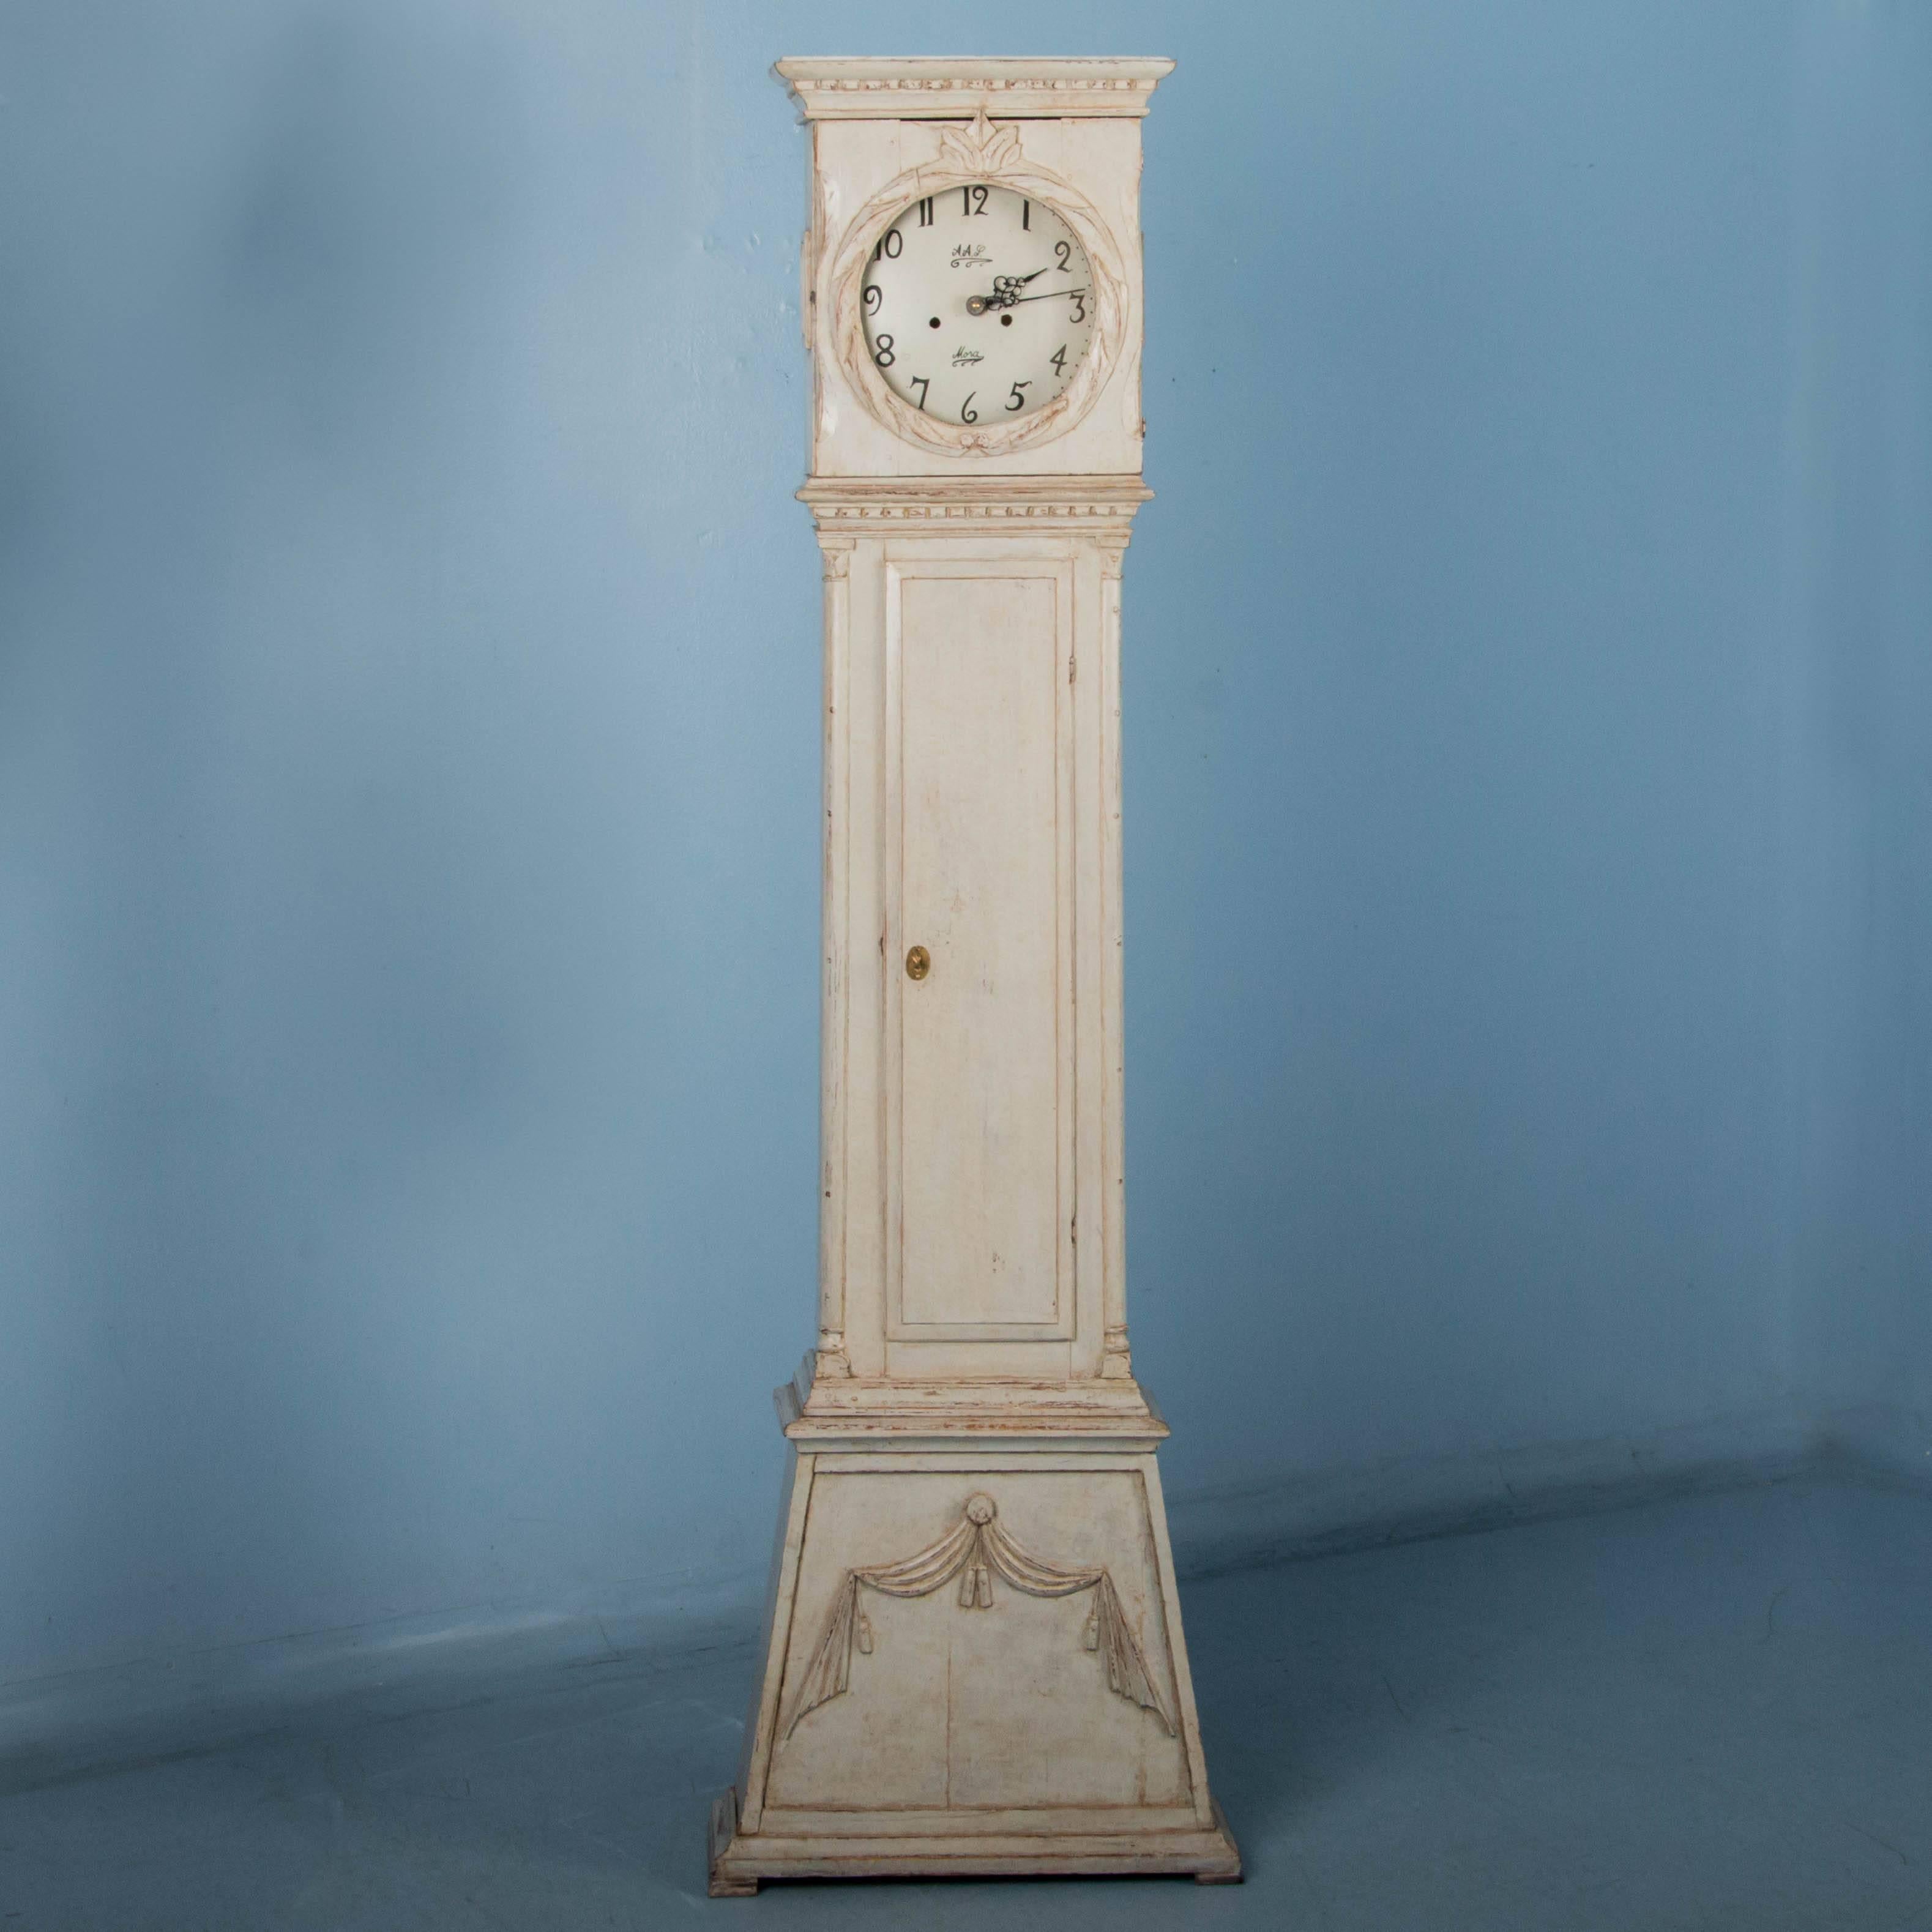 Handcrafted in the traditional mid-19th century Danish style, this charming grandfather clock is unusual due to it's smaller scale. The exceptional original grey paint is lightly distressed creating the perfect contrast with the dark pine underneath